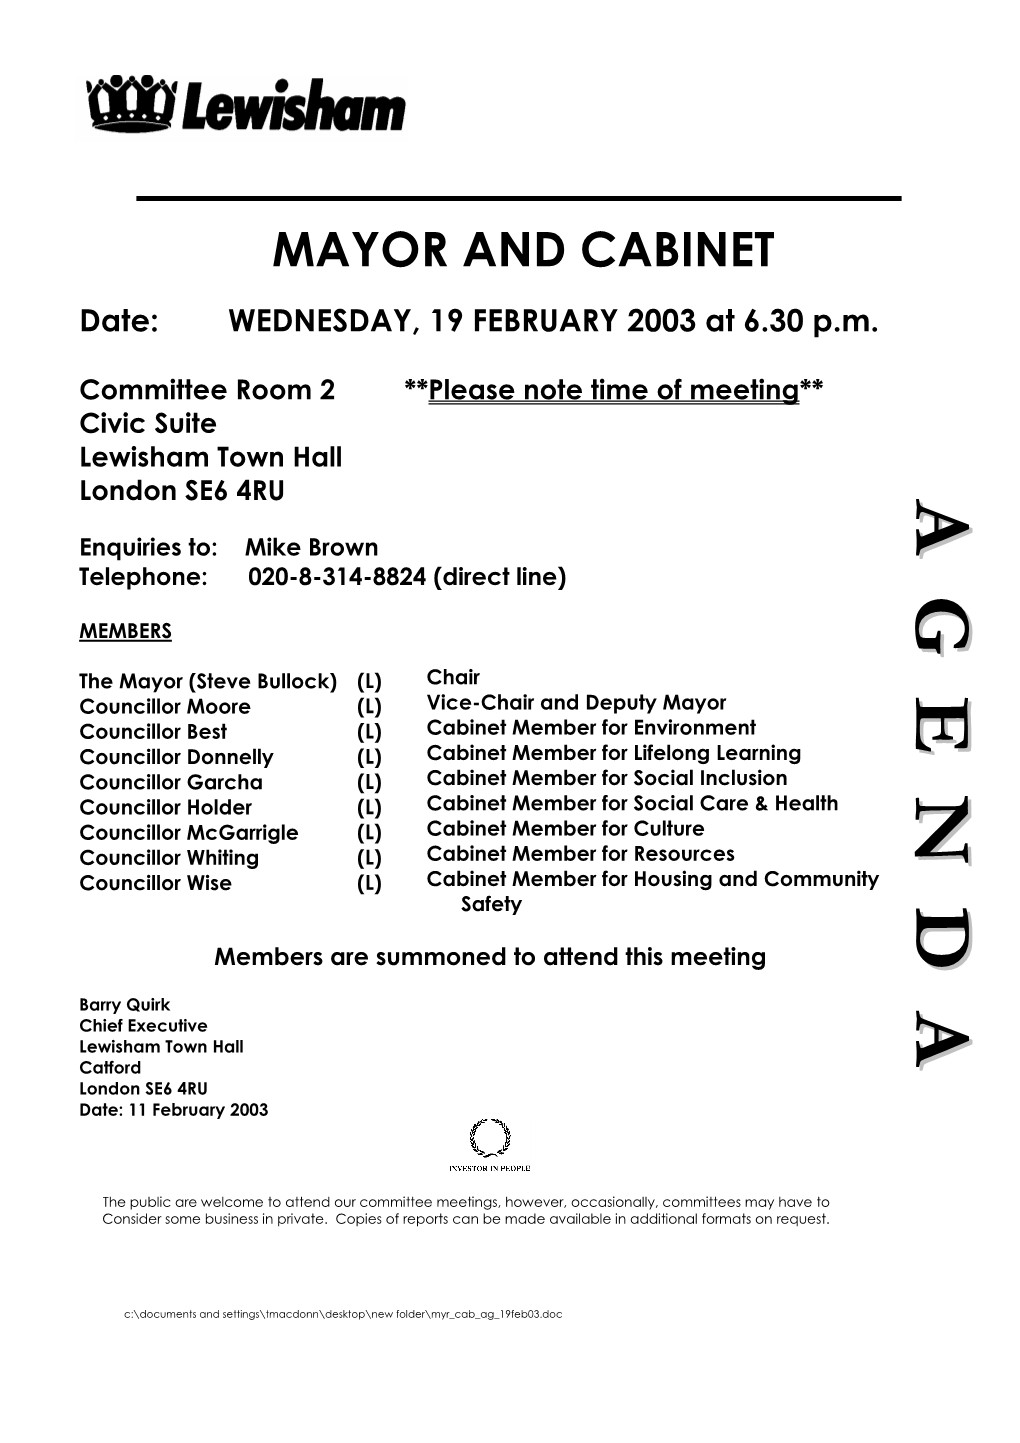 MAYOR and CABINET Date: WEDNESDAY, 19 FEBRUARY 2003 at 6.30 P.M